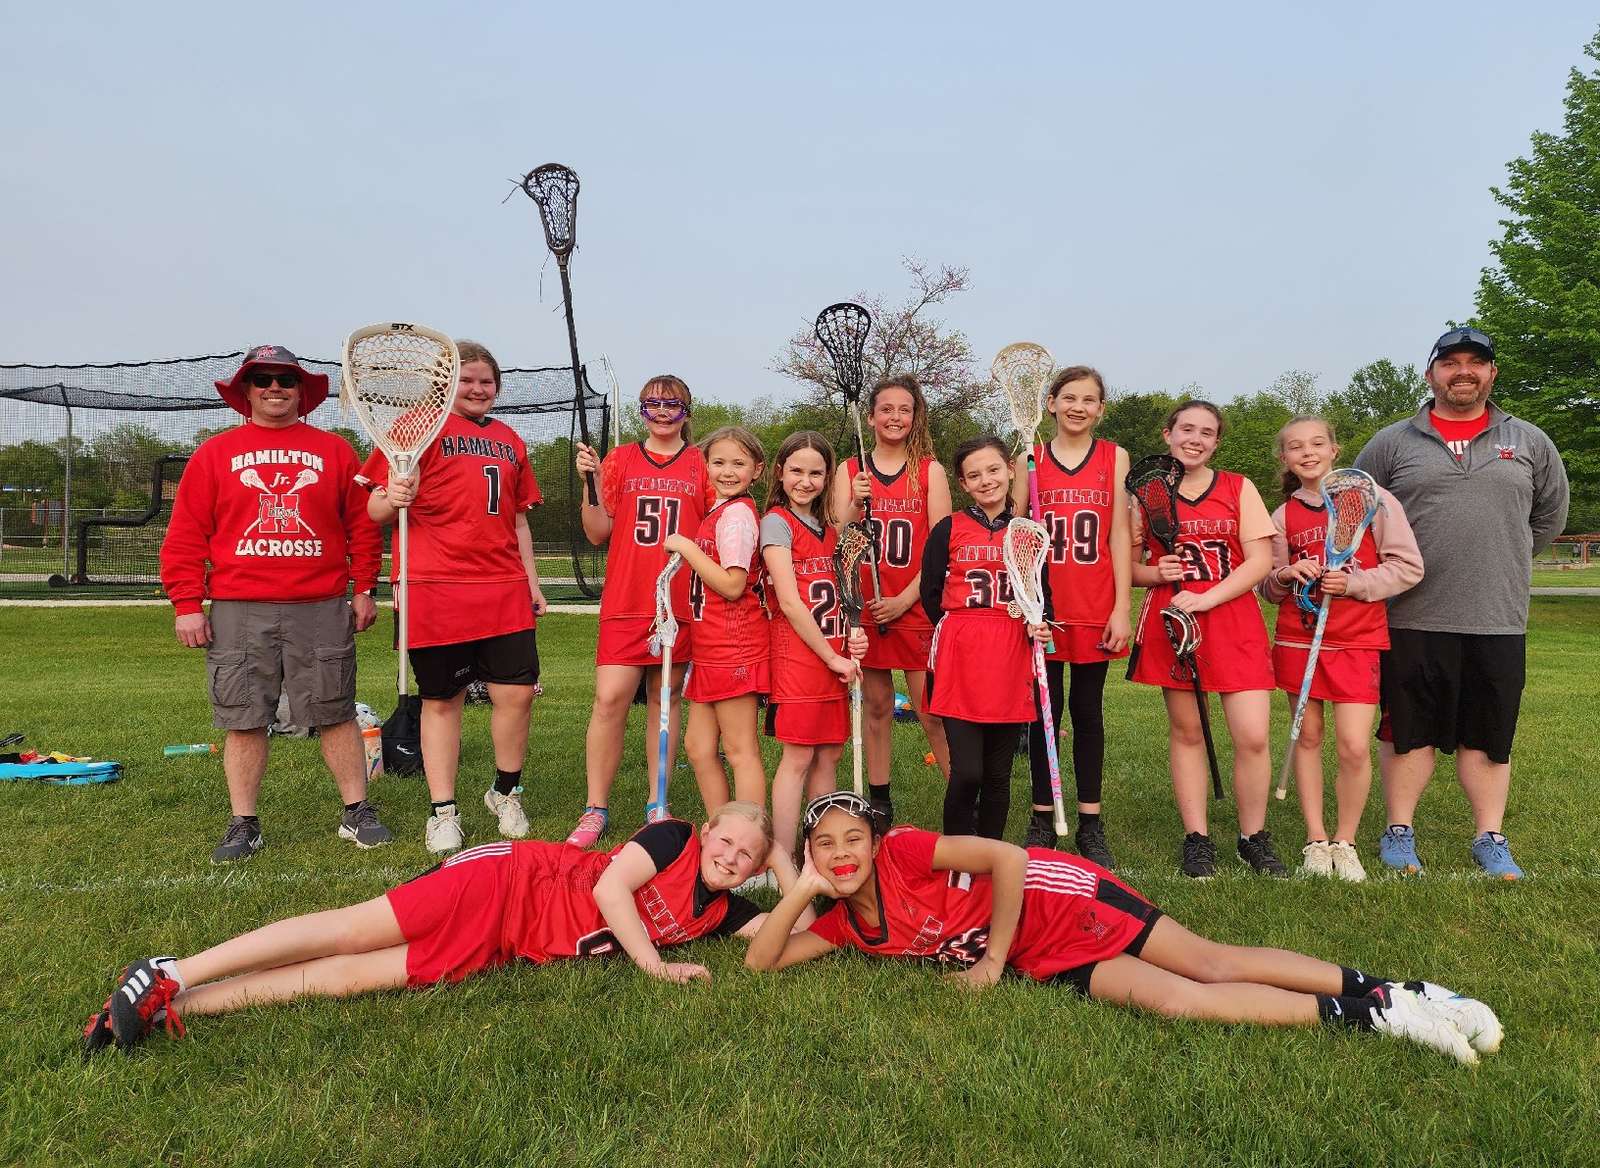 lacrosse team puzzle online from photo